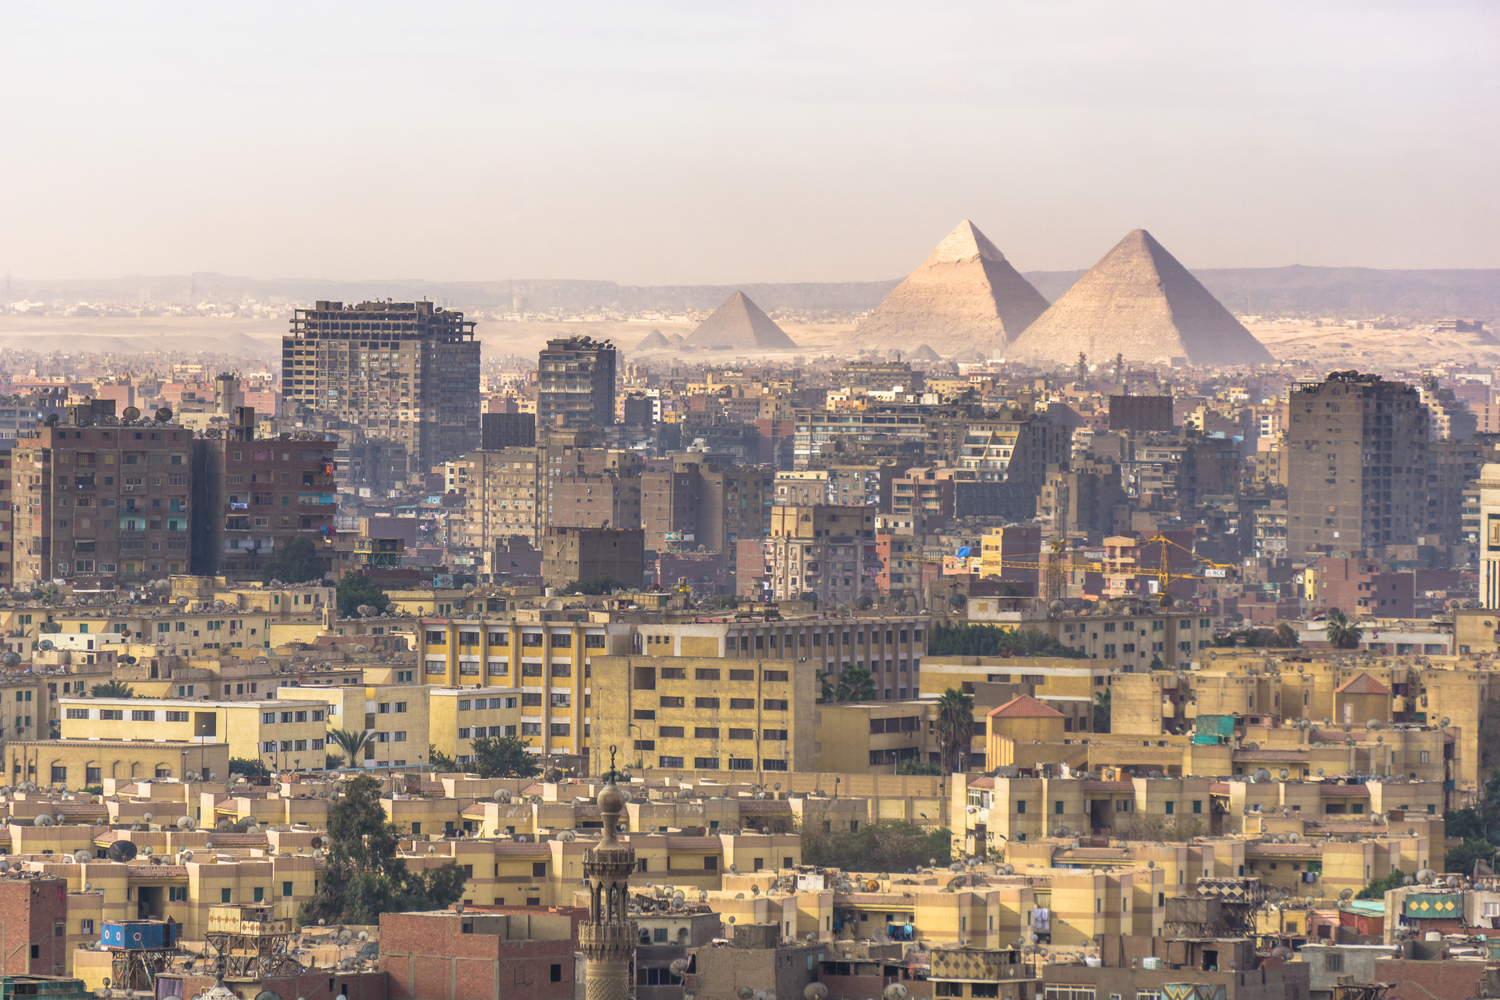 cairo-architecture-city-guide-exploring-the-unique-architectural-blend-of-historical-and-contemporary-in-egypts-bustling-capital_23_1.jpg